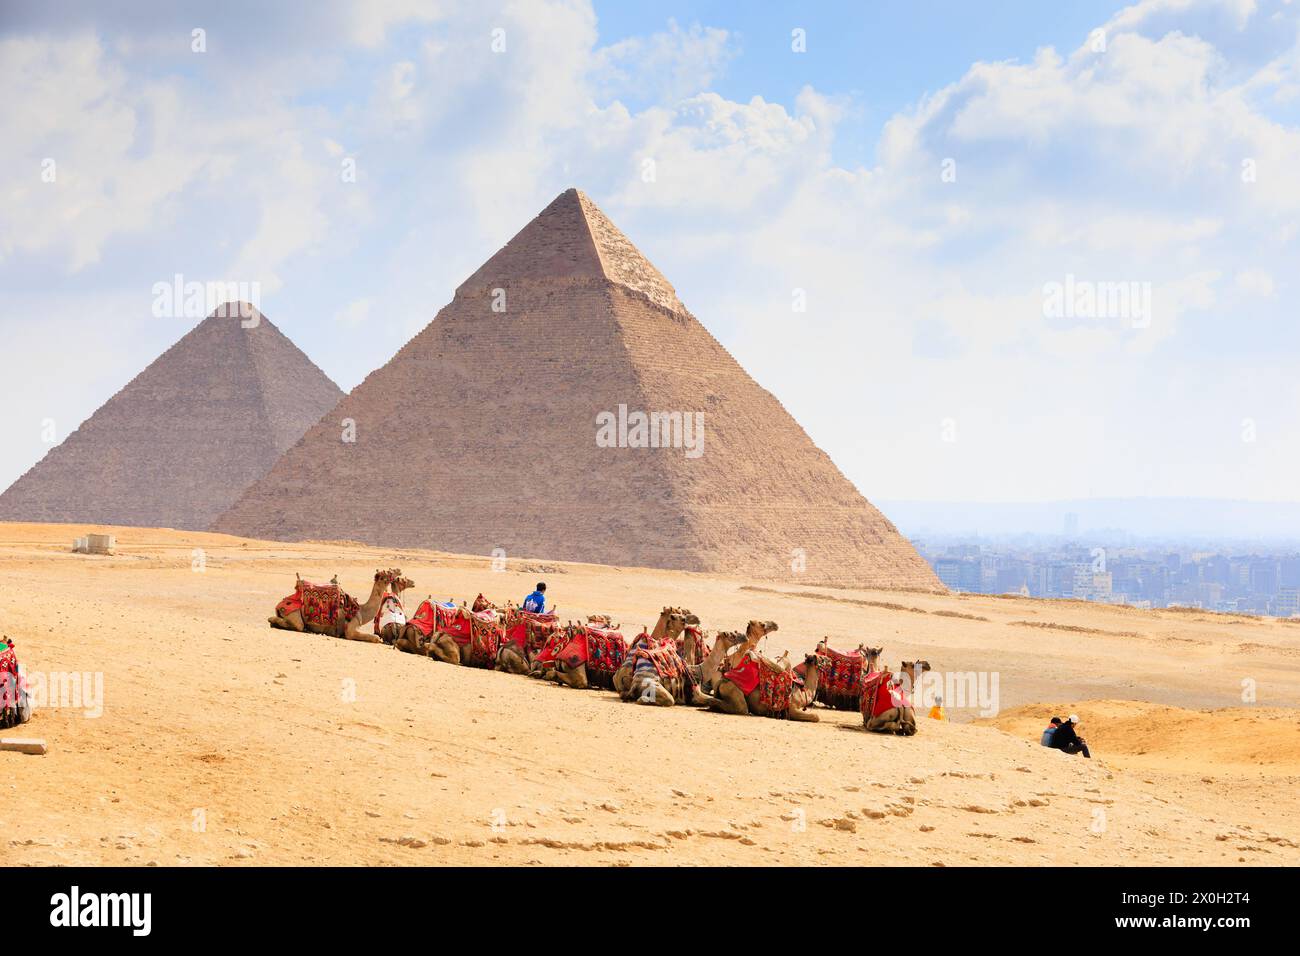 Resting Bedouin camel train in the desert with the Great Pyramids of Giza, Cairo, Egypt Stock Photo